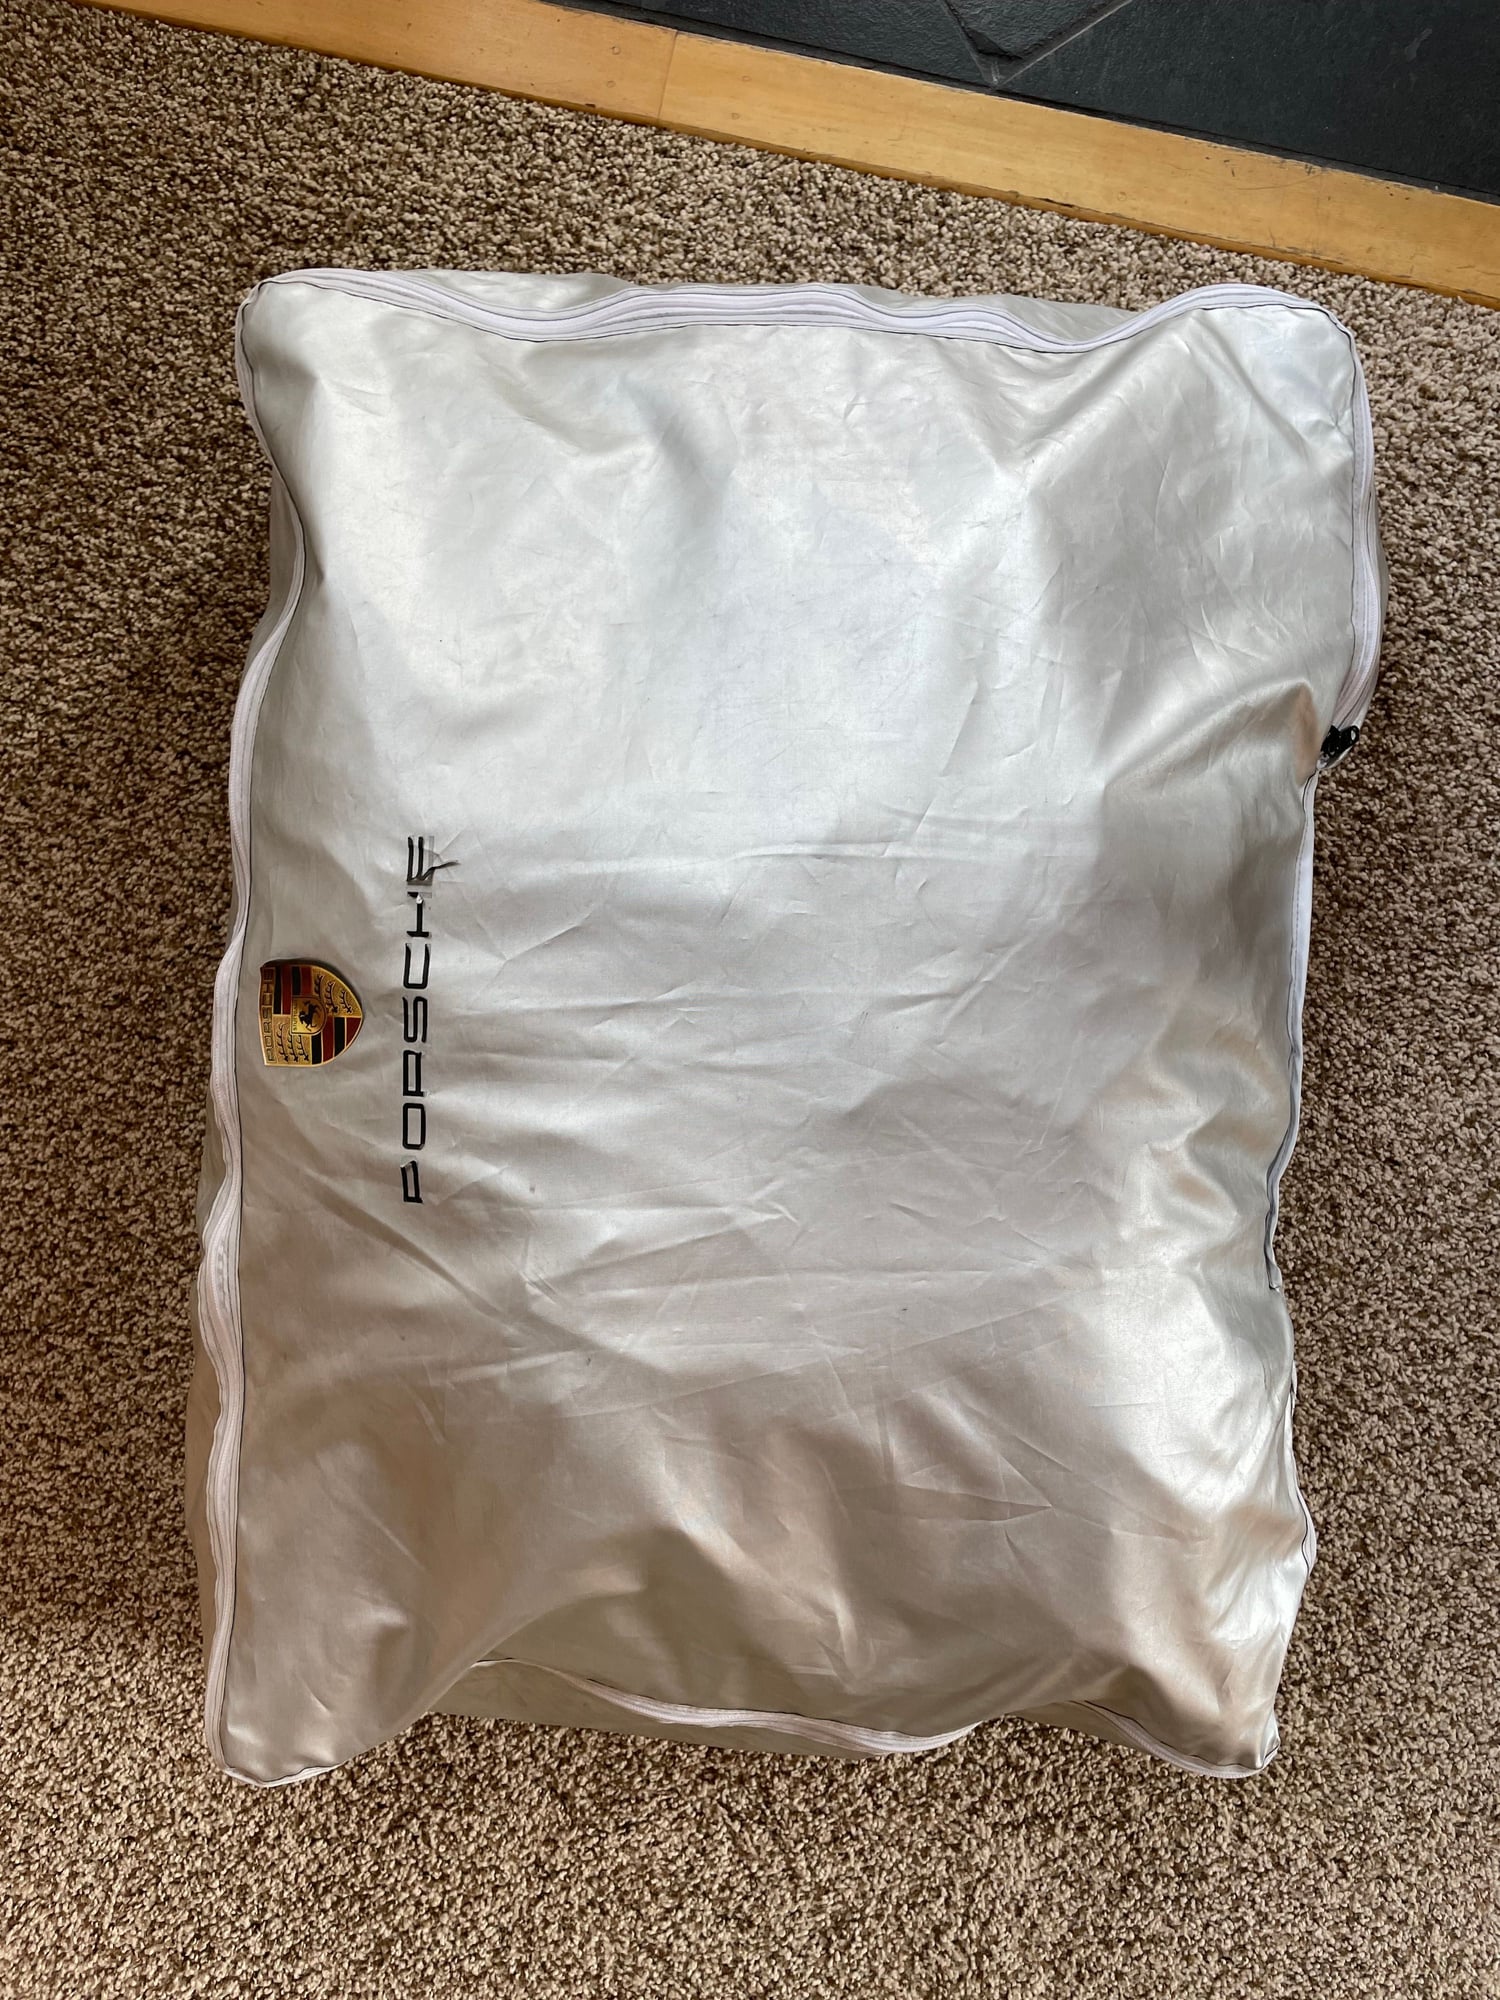 Accessories - Boxster Car Cover 987/986 - Used - 1999 to 2010 Porsche Boxster - Truckee, CA 96161, United States